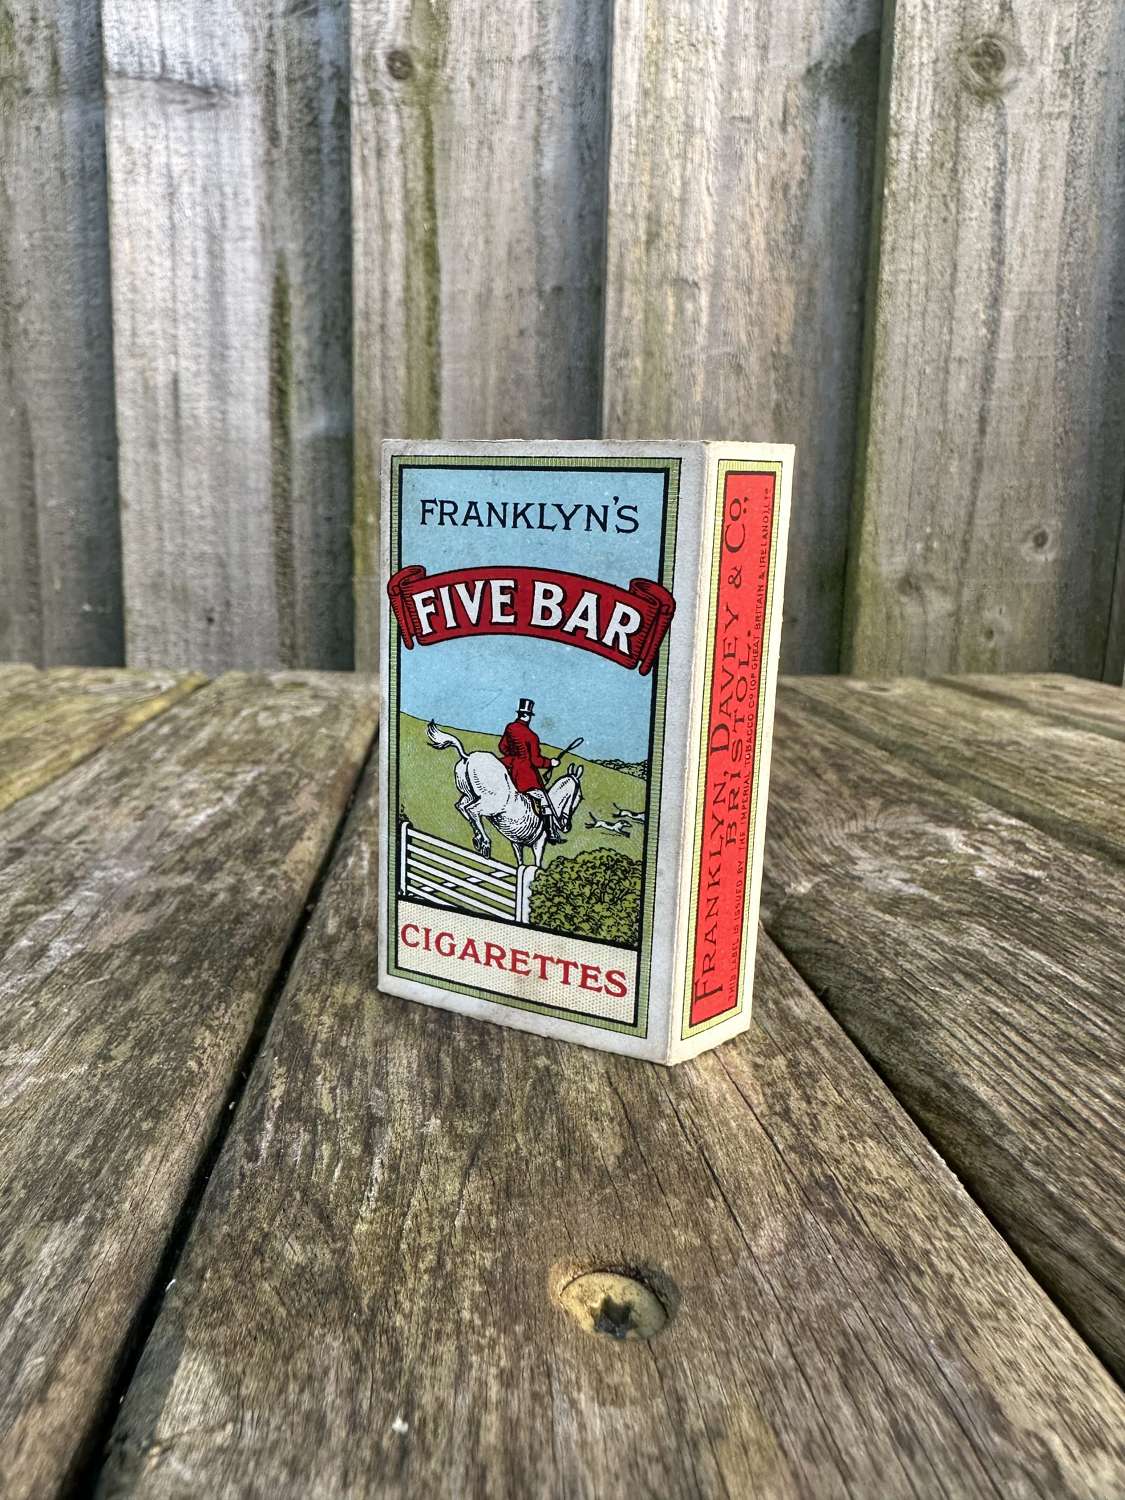 Scarce example of franklyns five bar cigarette packet